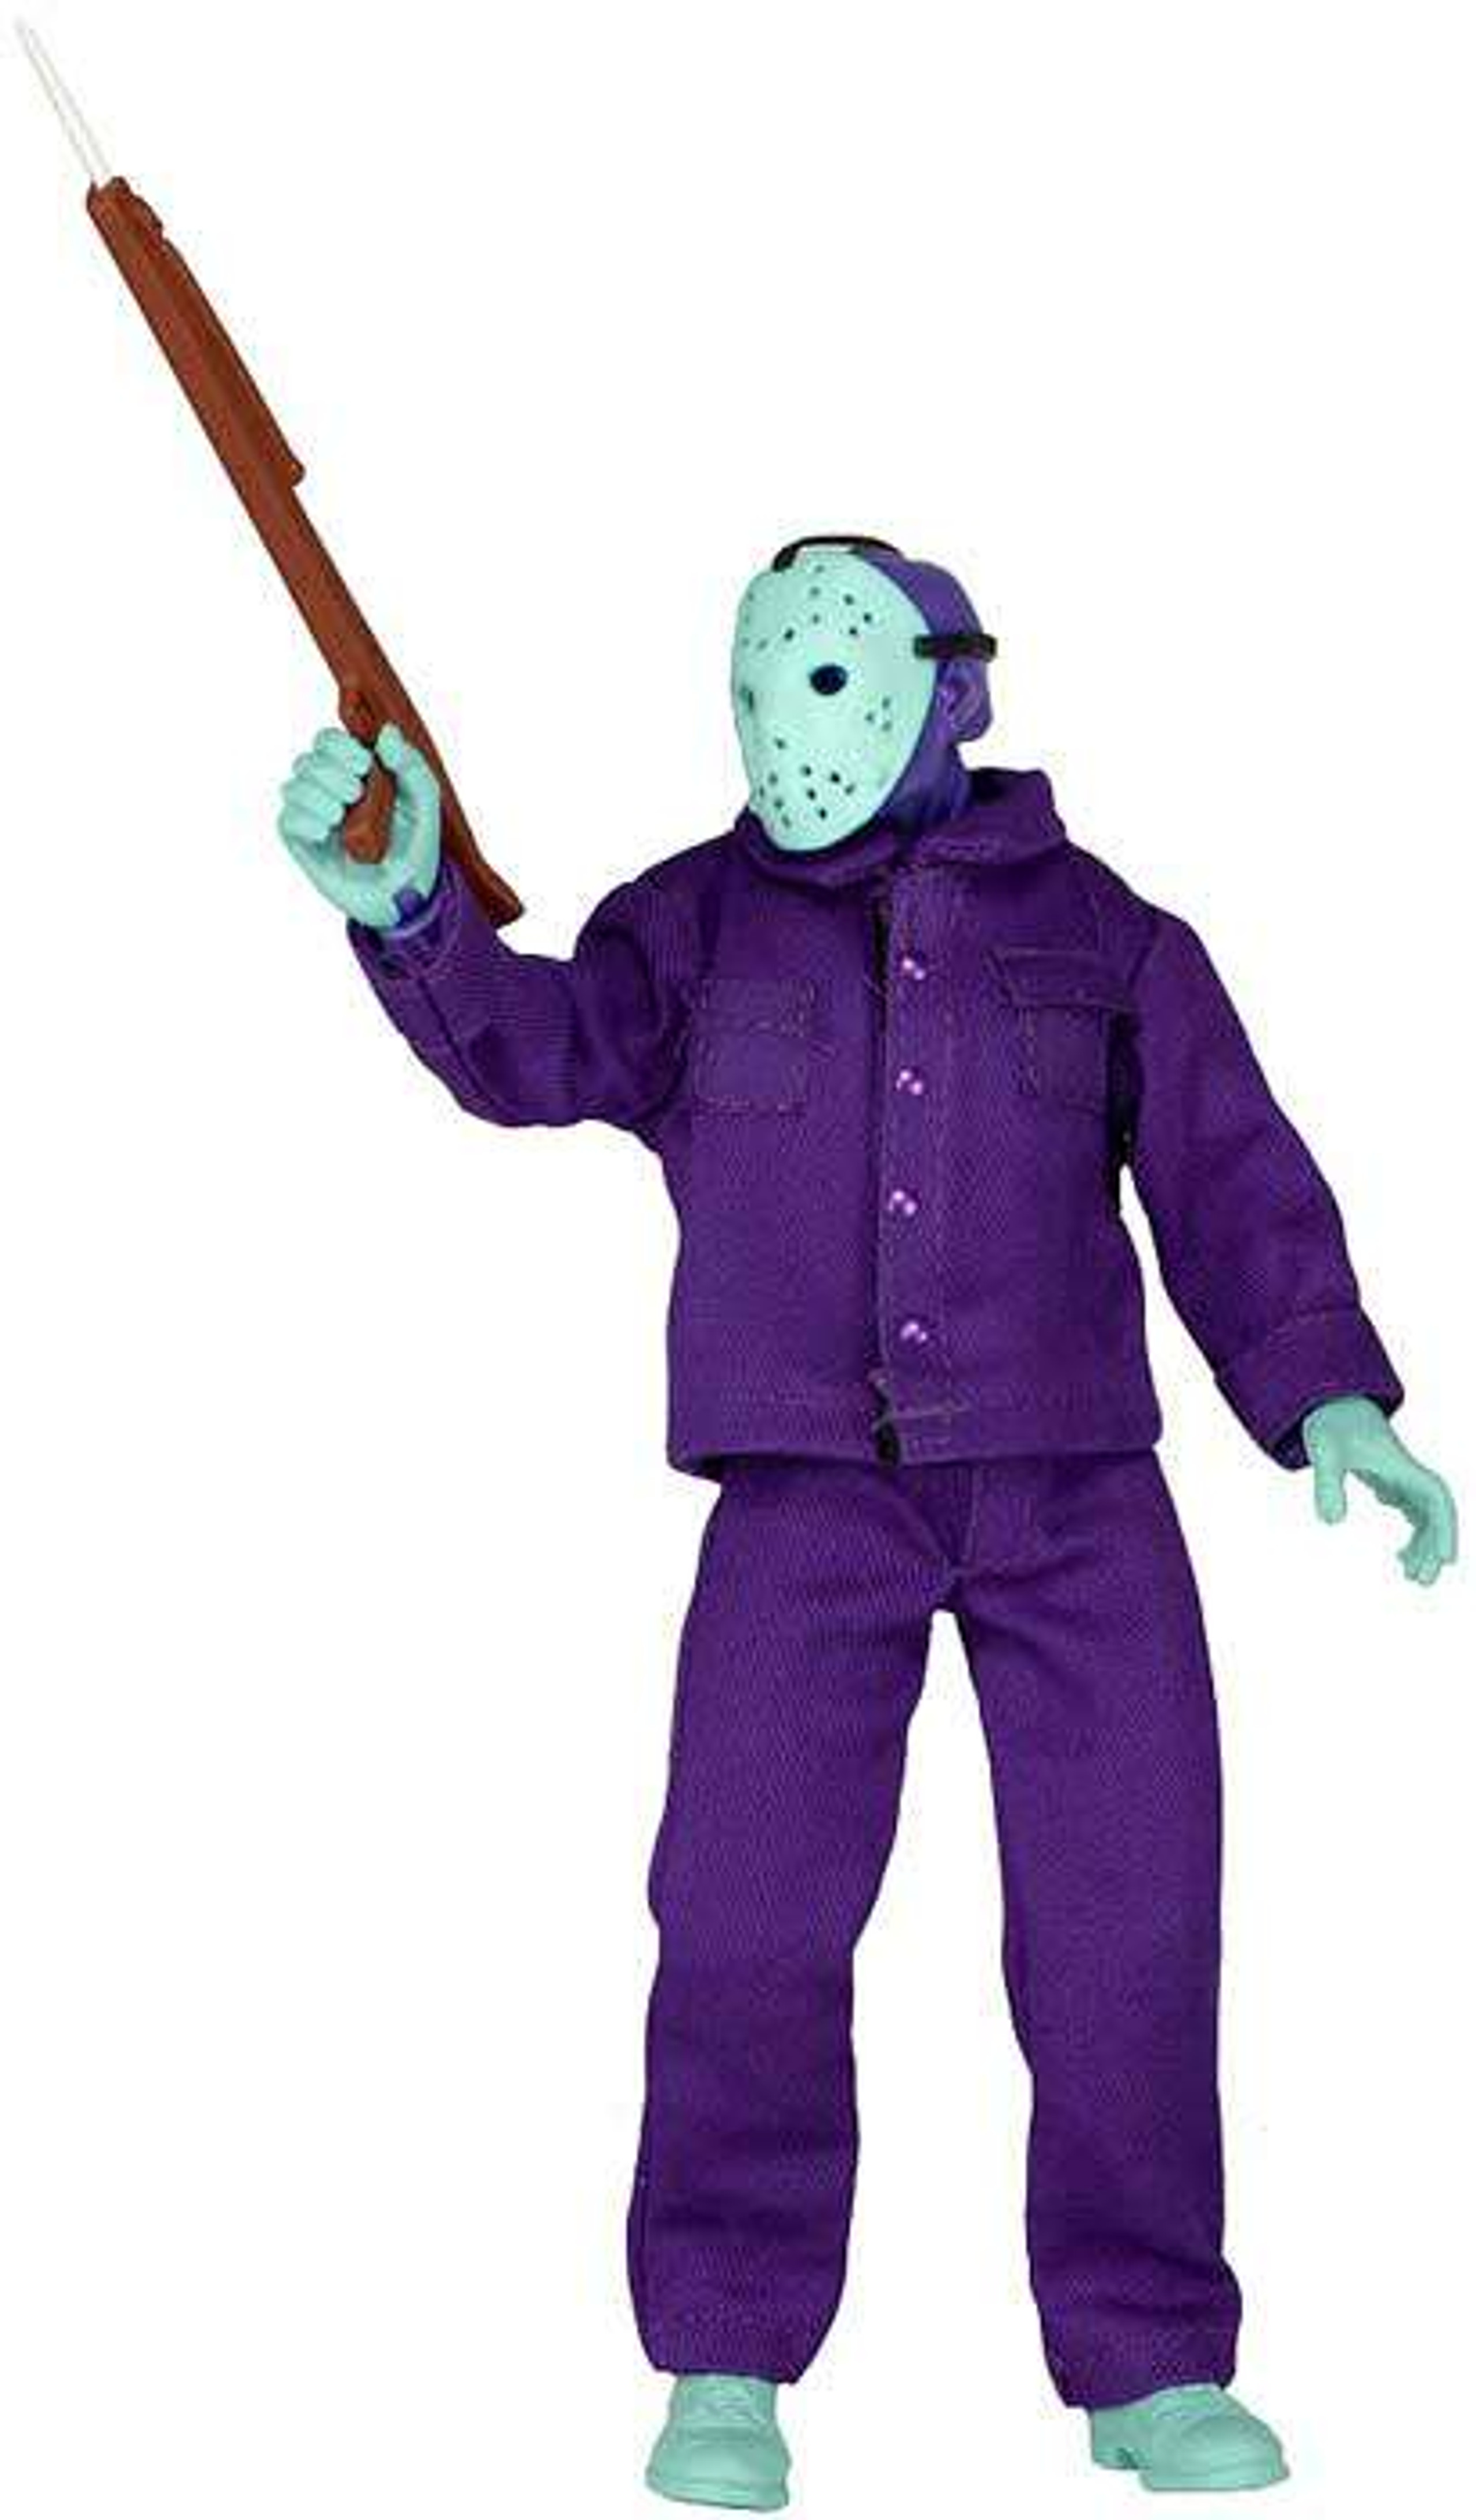 Neca Friday The 13th Jason Voorhees Exclusive 8 Clothed Action Figure Nes Game Toywiz